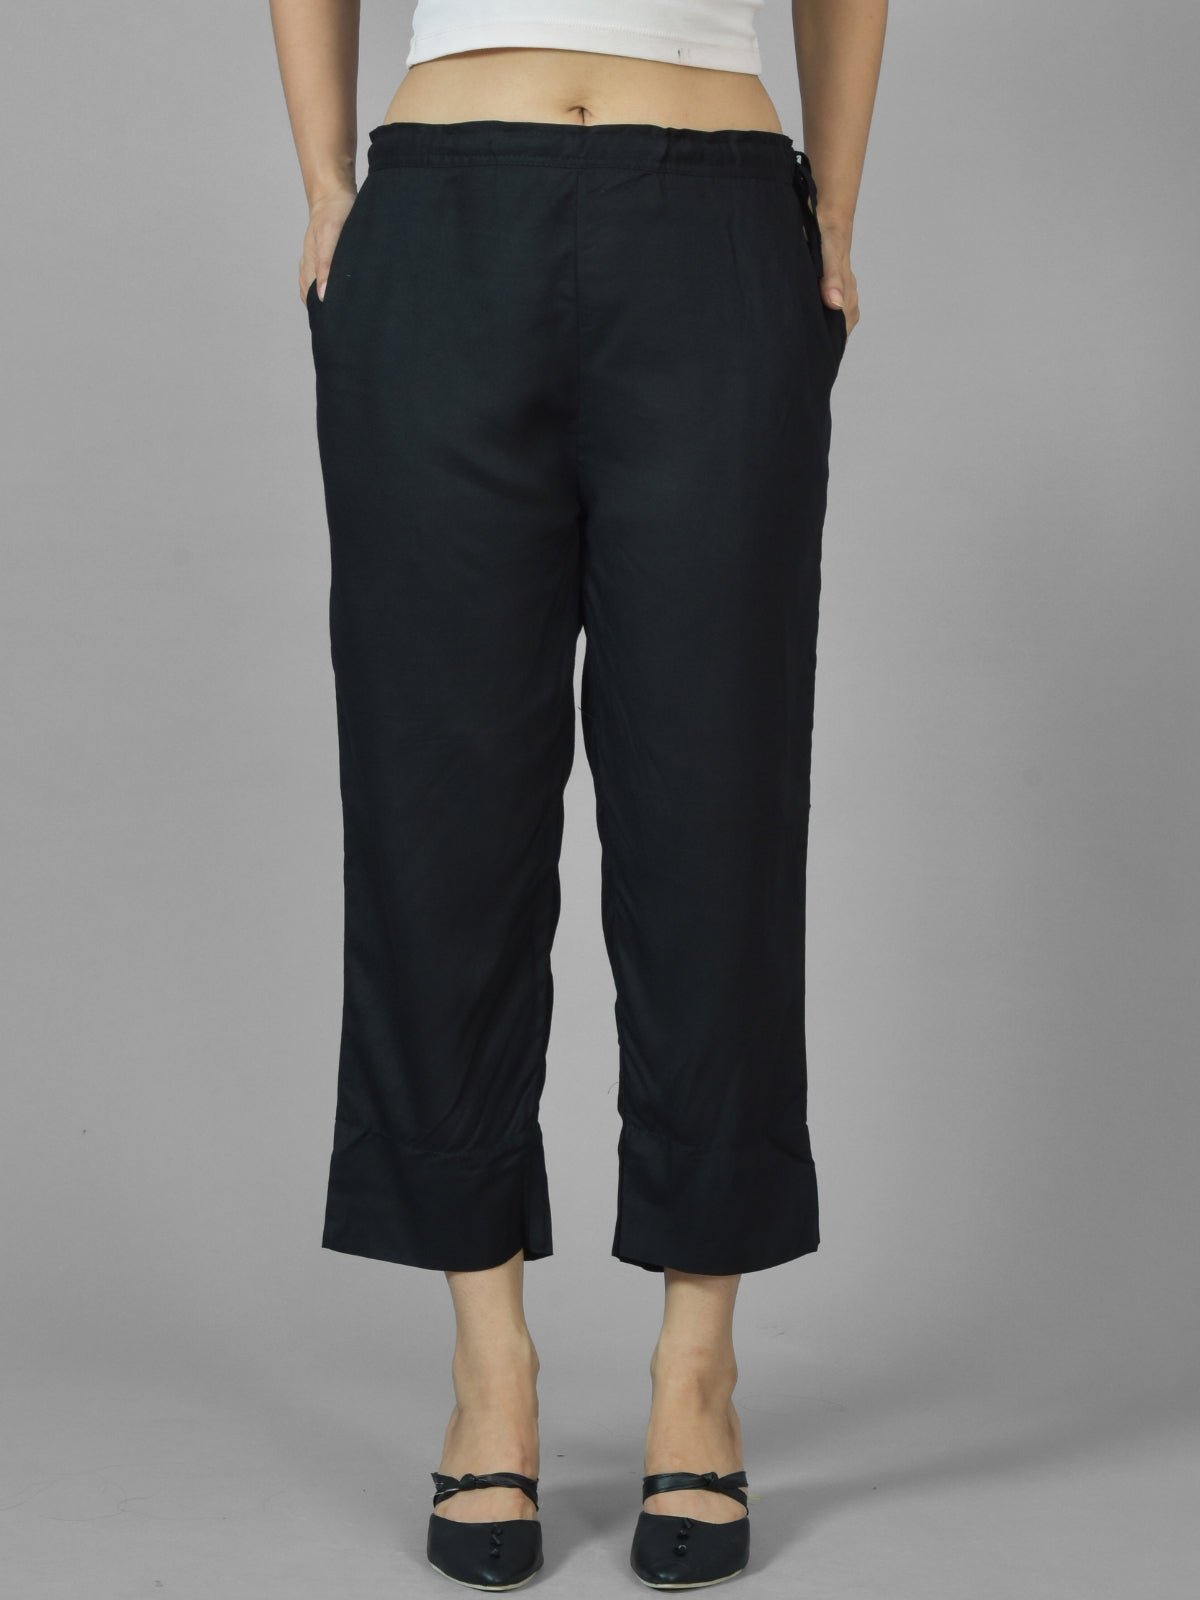 Women Solid Black Rayon Culottes Trouser